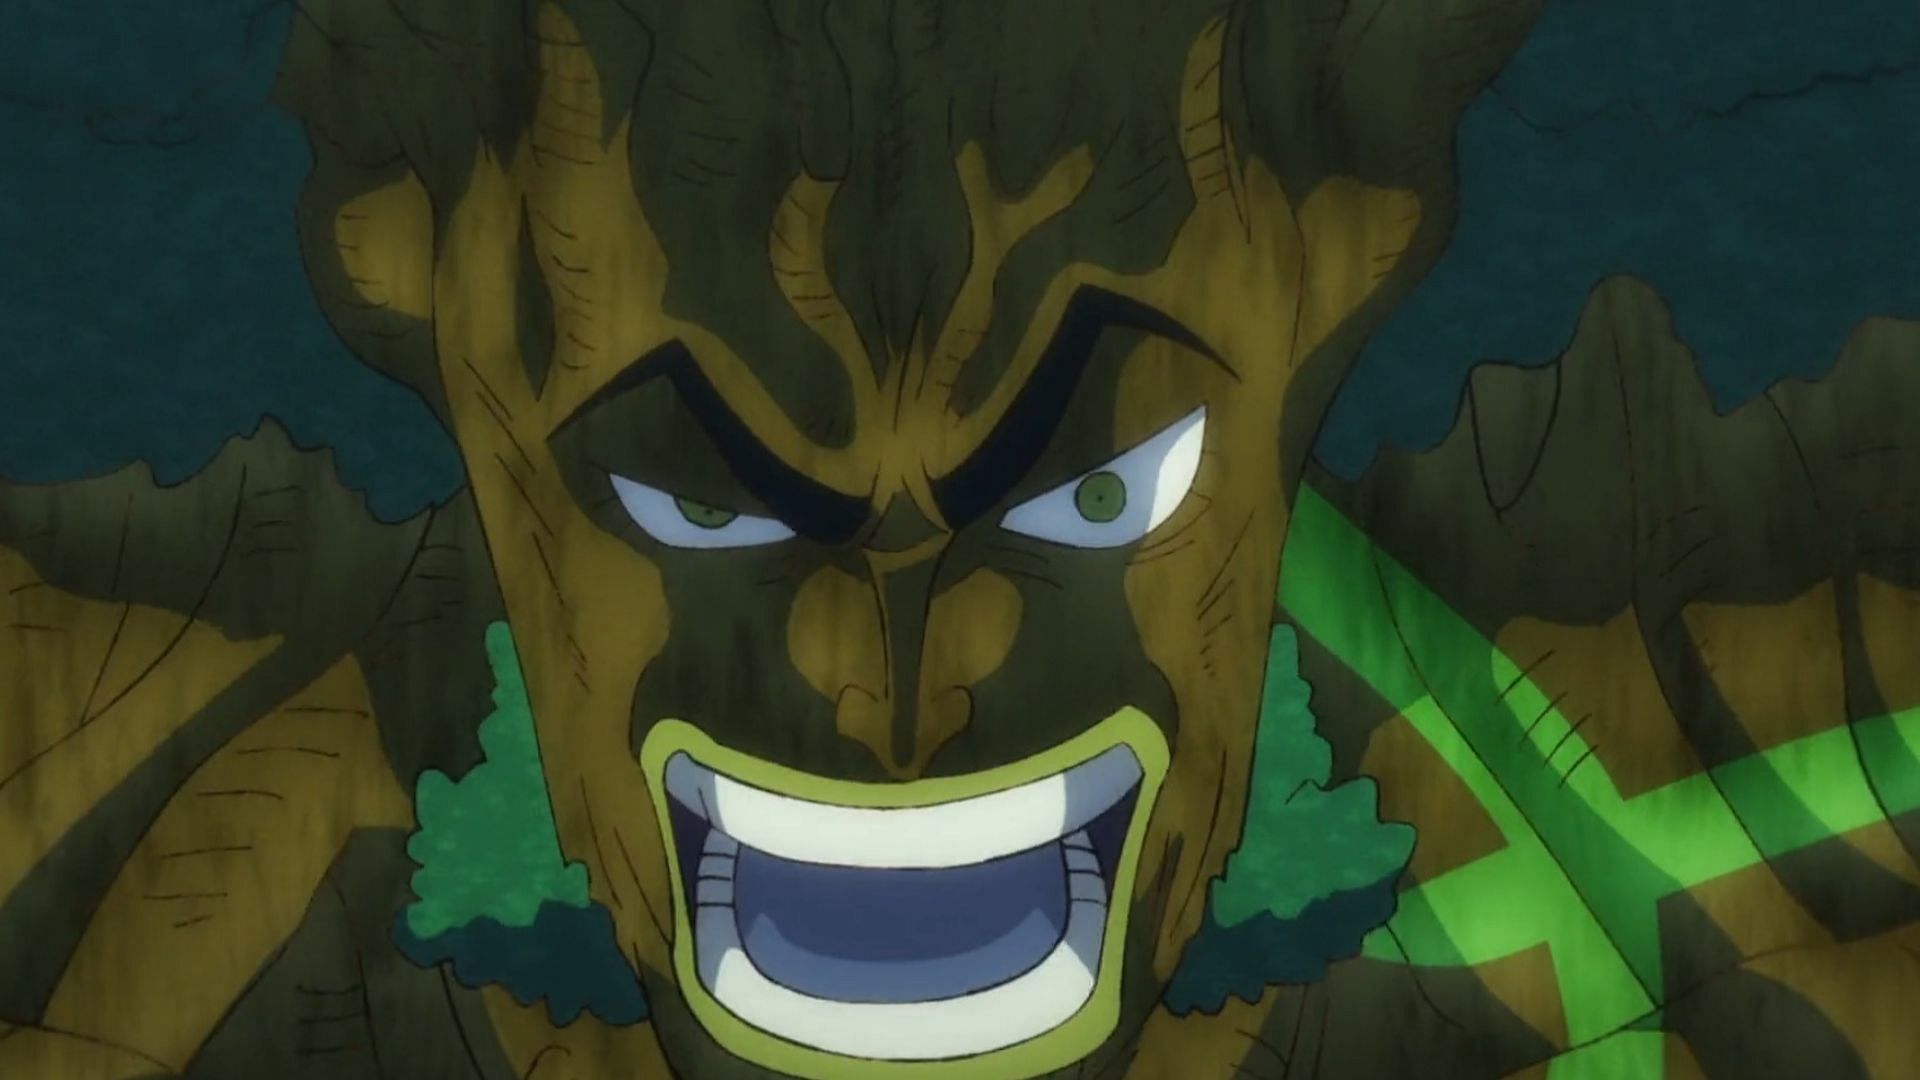 Ryokugyu as seen in One Piece (Image via Toei)